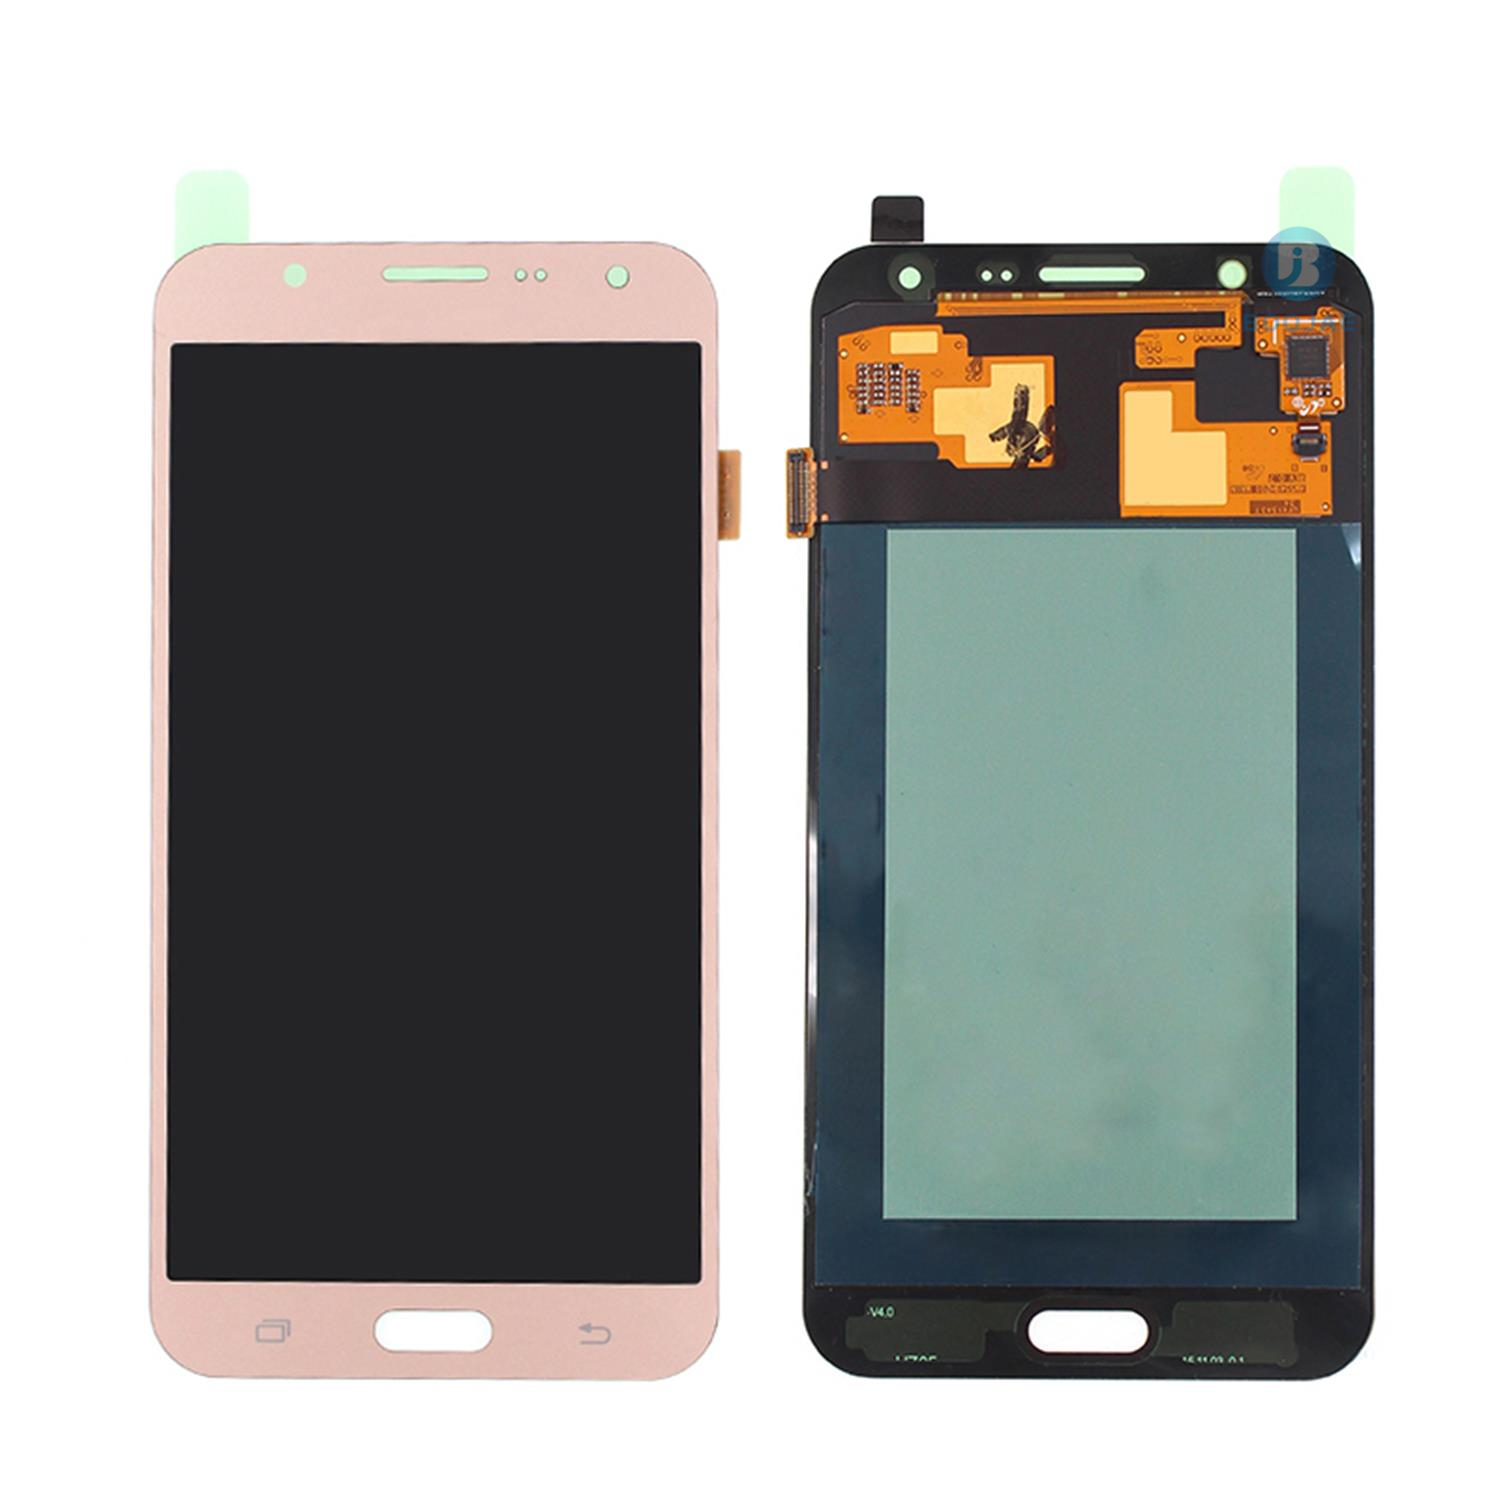 Samsung Galaxy J7 2015 J700 LCD Screen Display and Touch Panel Digitizer Assembly Replacement